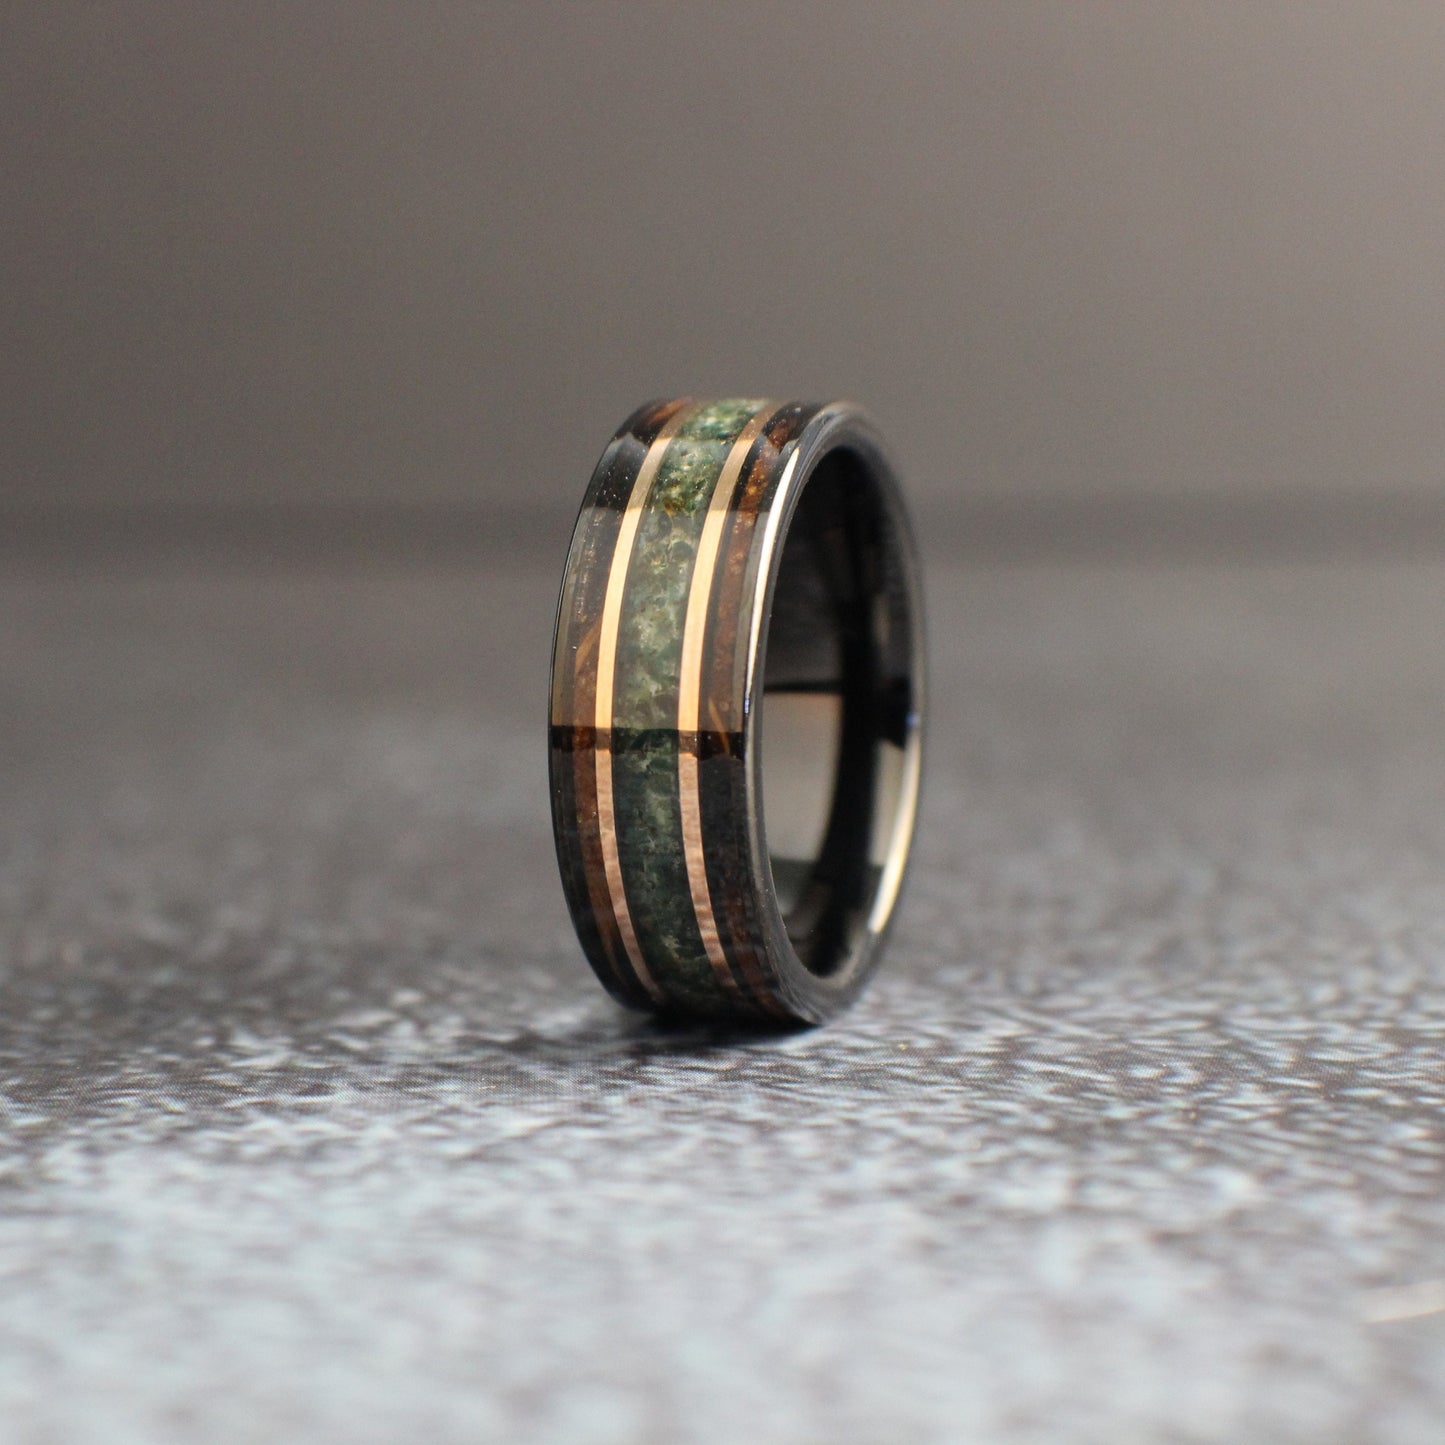 Rose gold and moss agate tungsten wedding ring